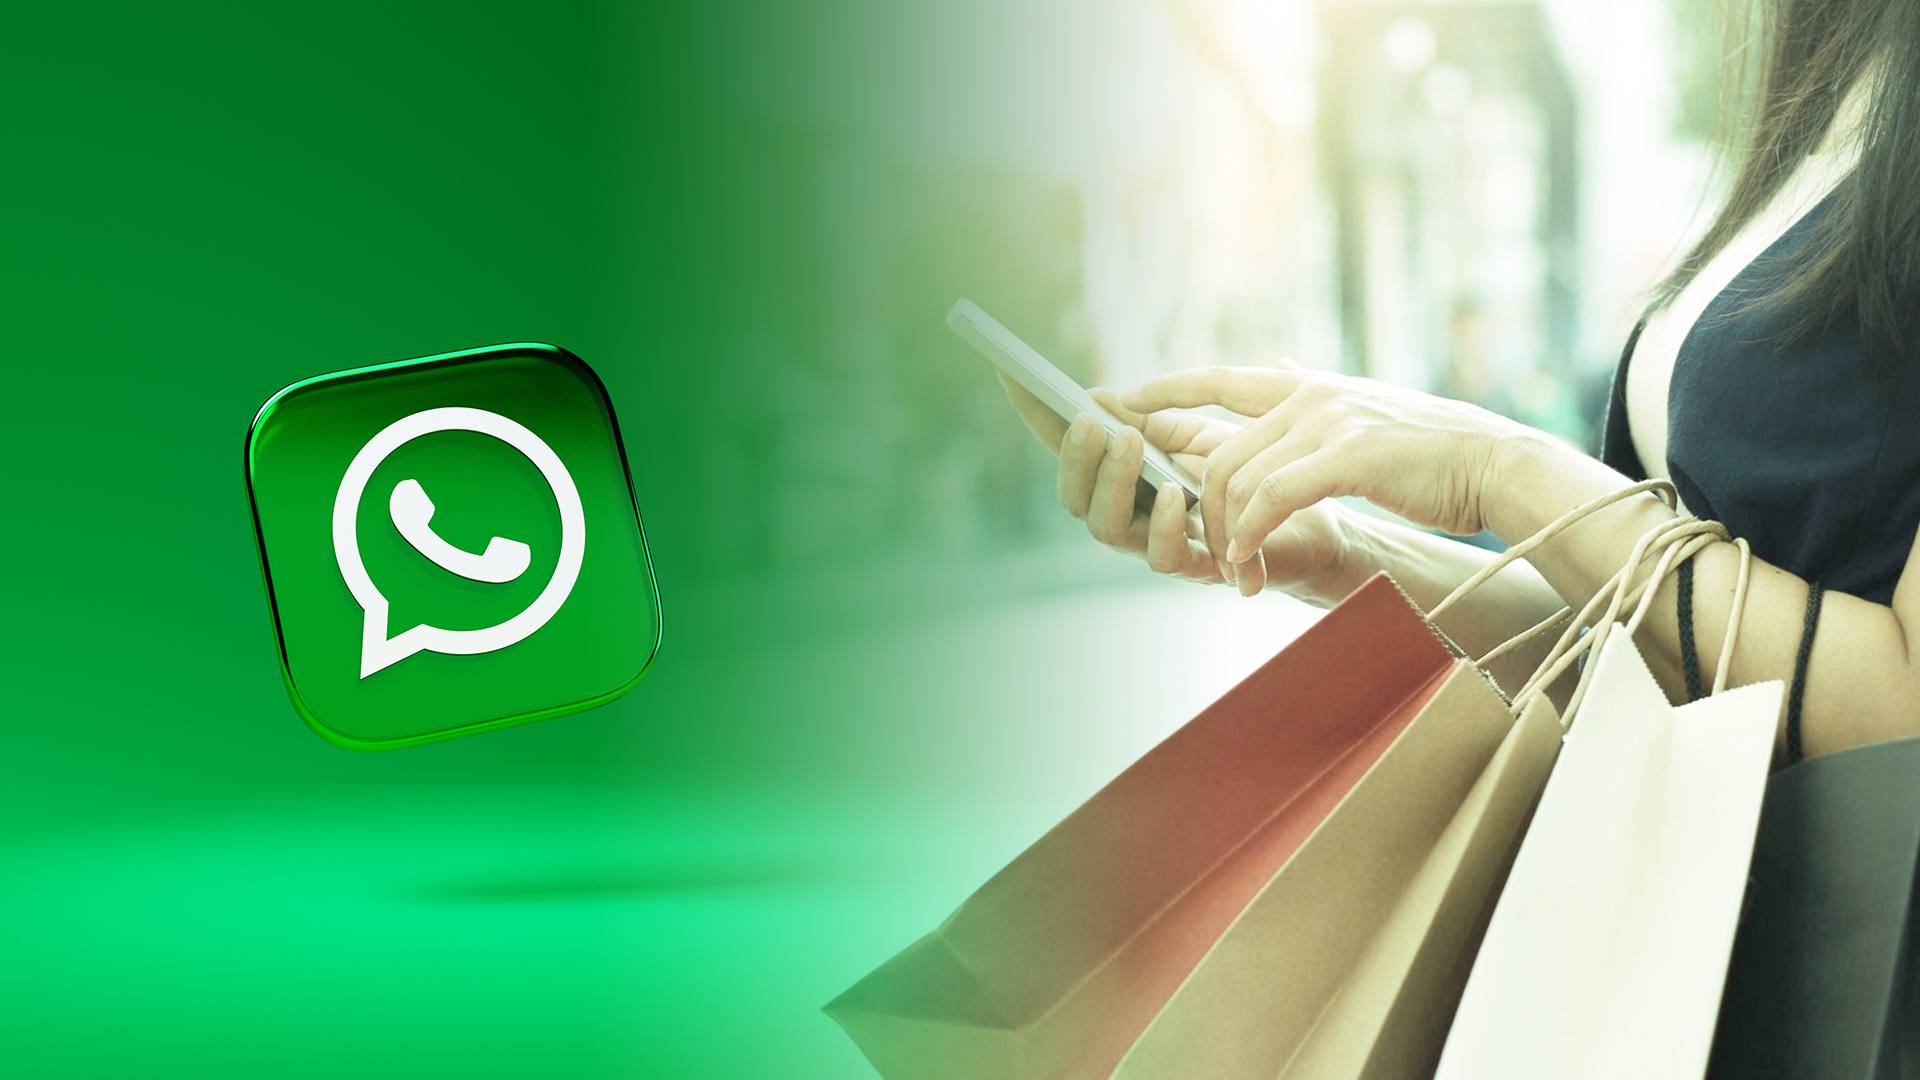 Majority of Singapore shoppers say they will make purchases directly over  WhatsApp: Twilio study - MartechAsia